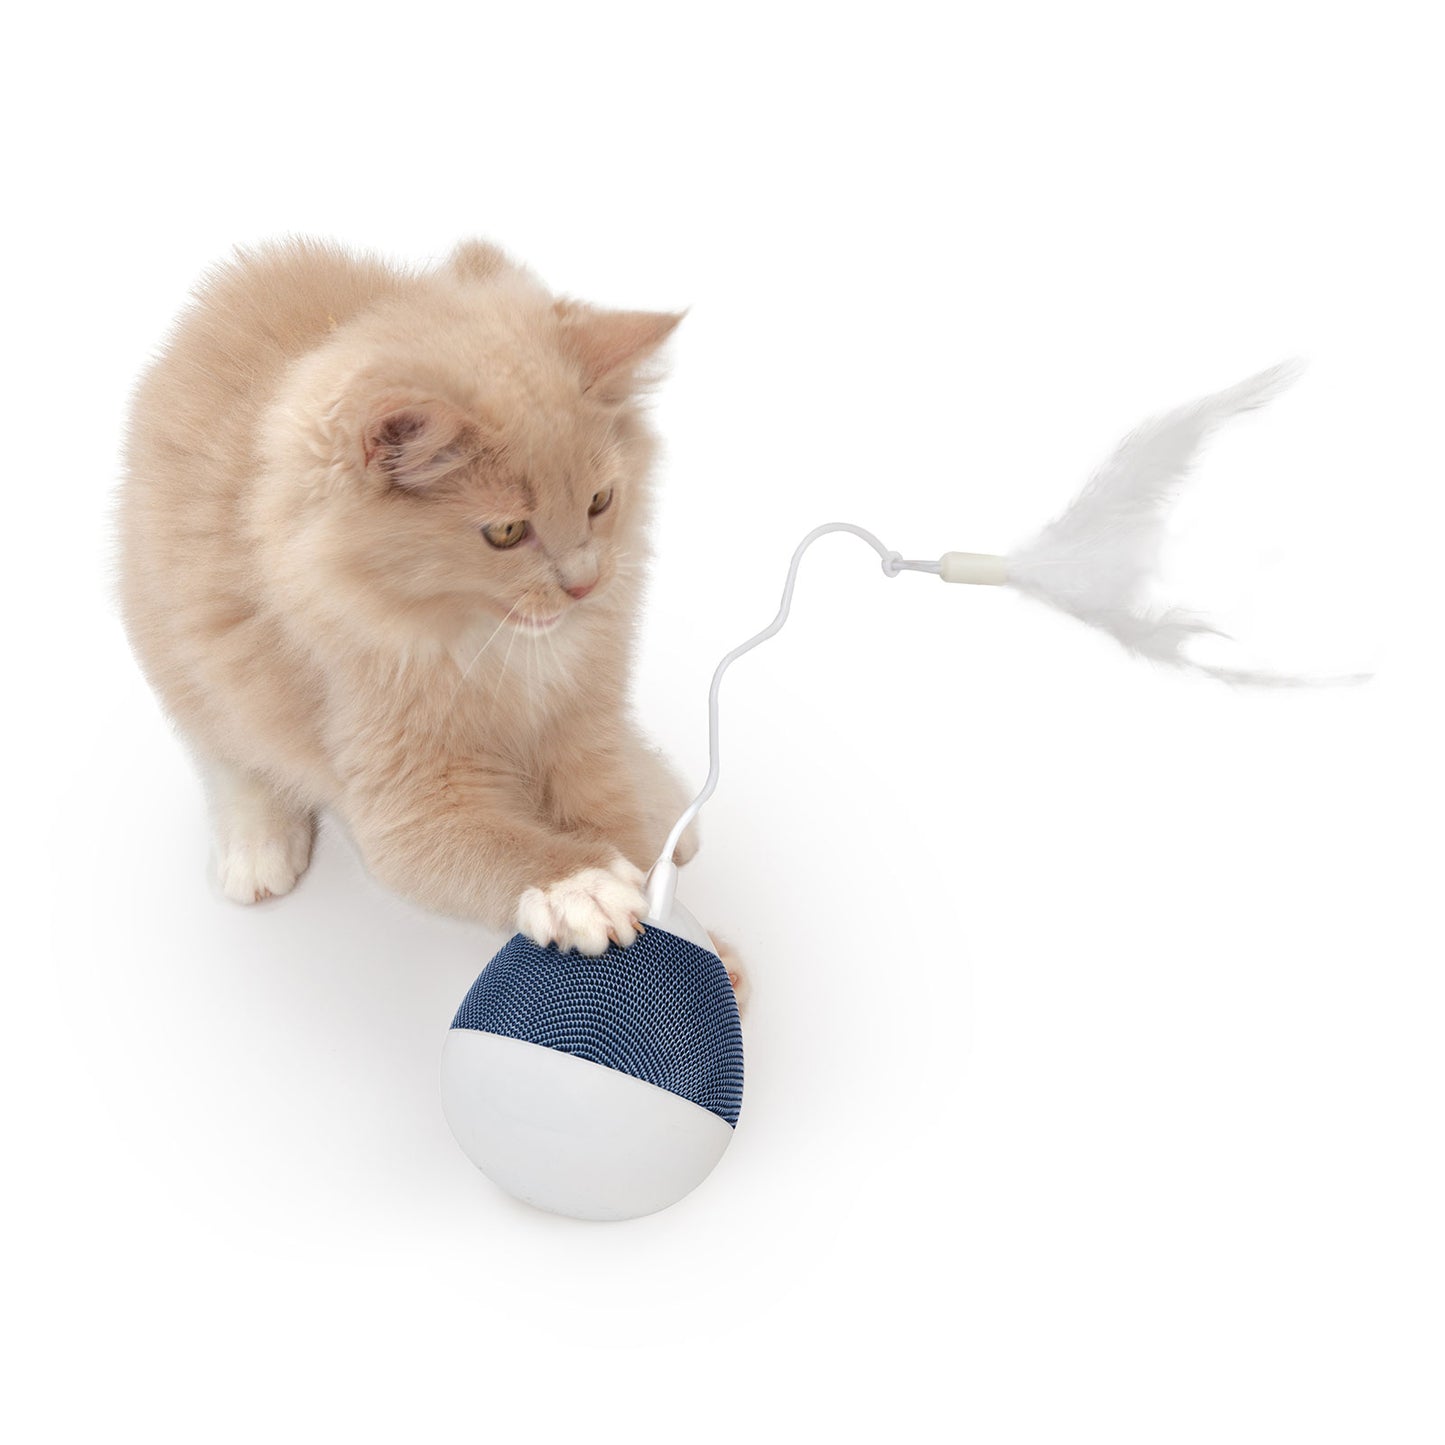 Catit PIXI Spinner - White & Blue Interactive Cat Toy